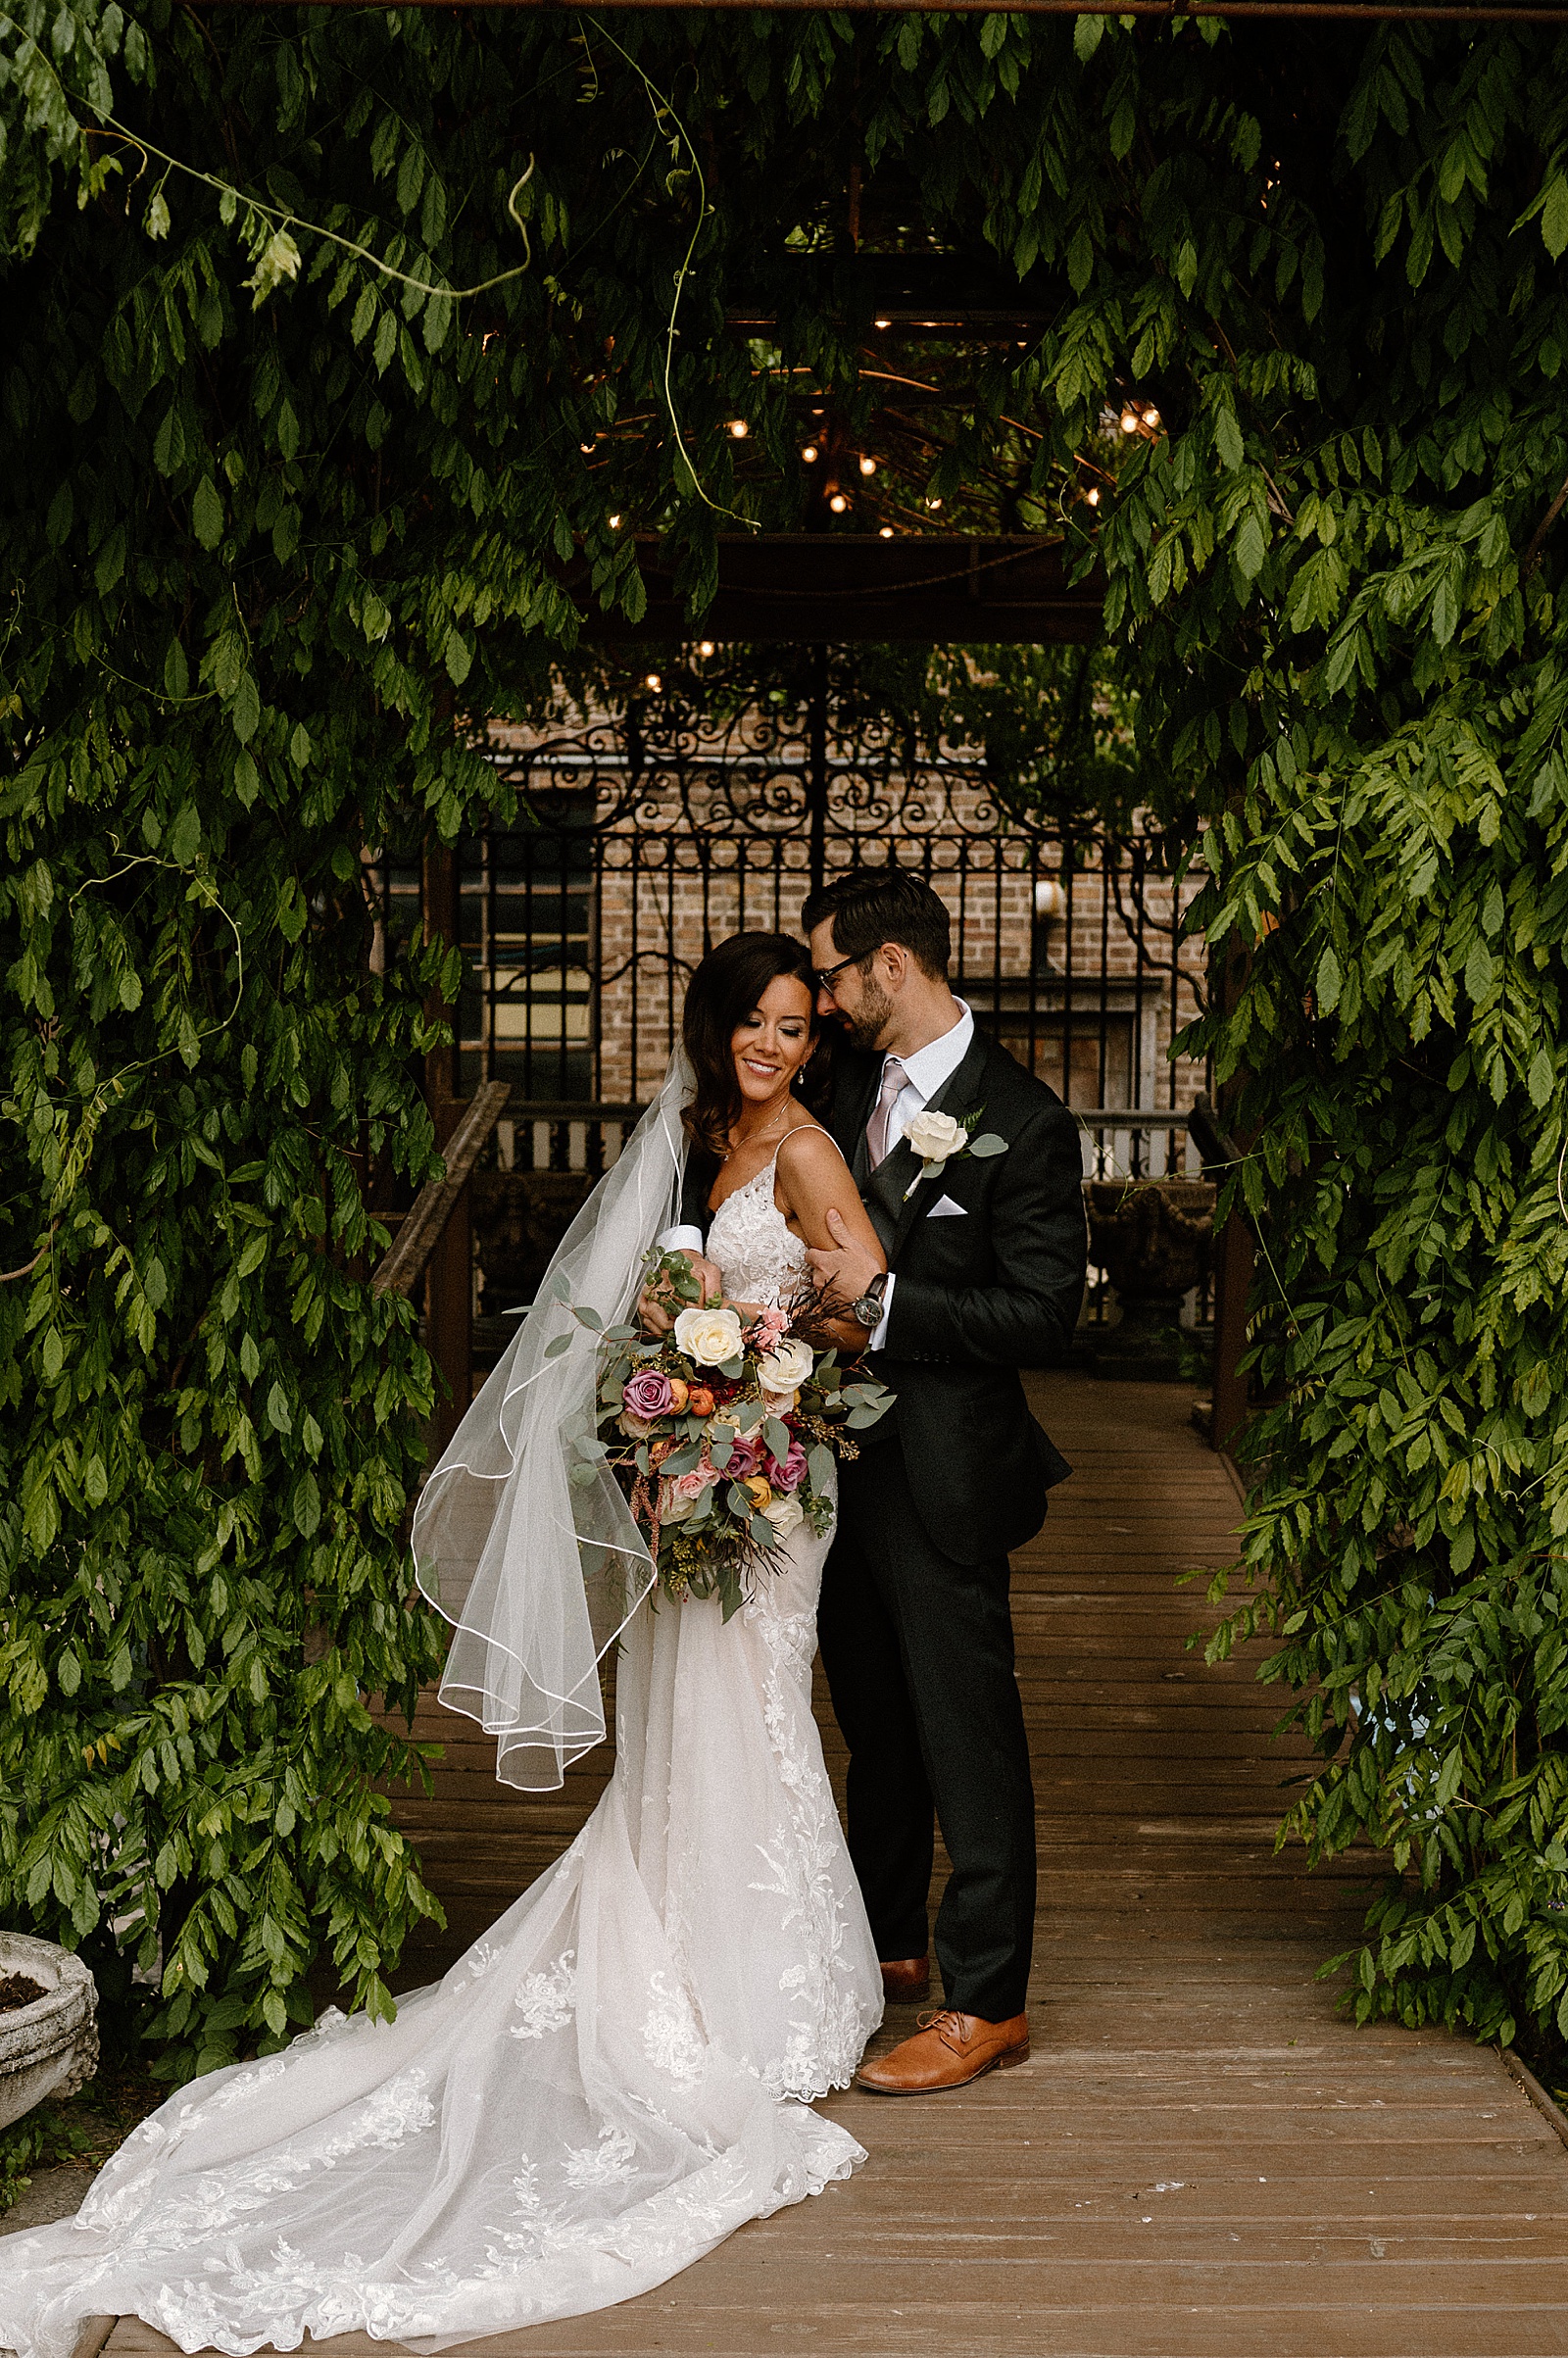 Wedding couple embracing under greenery for their Chicago special day 